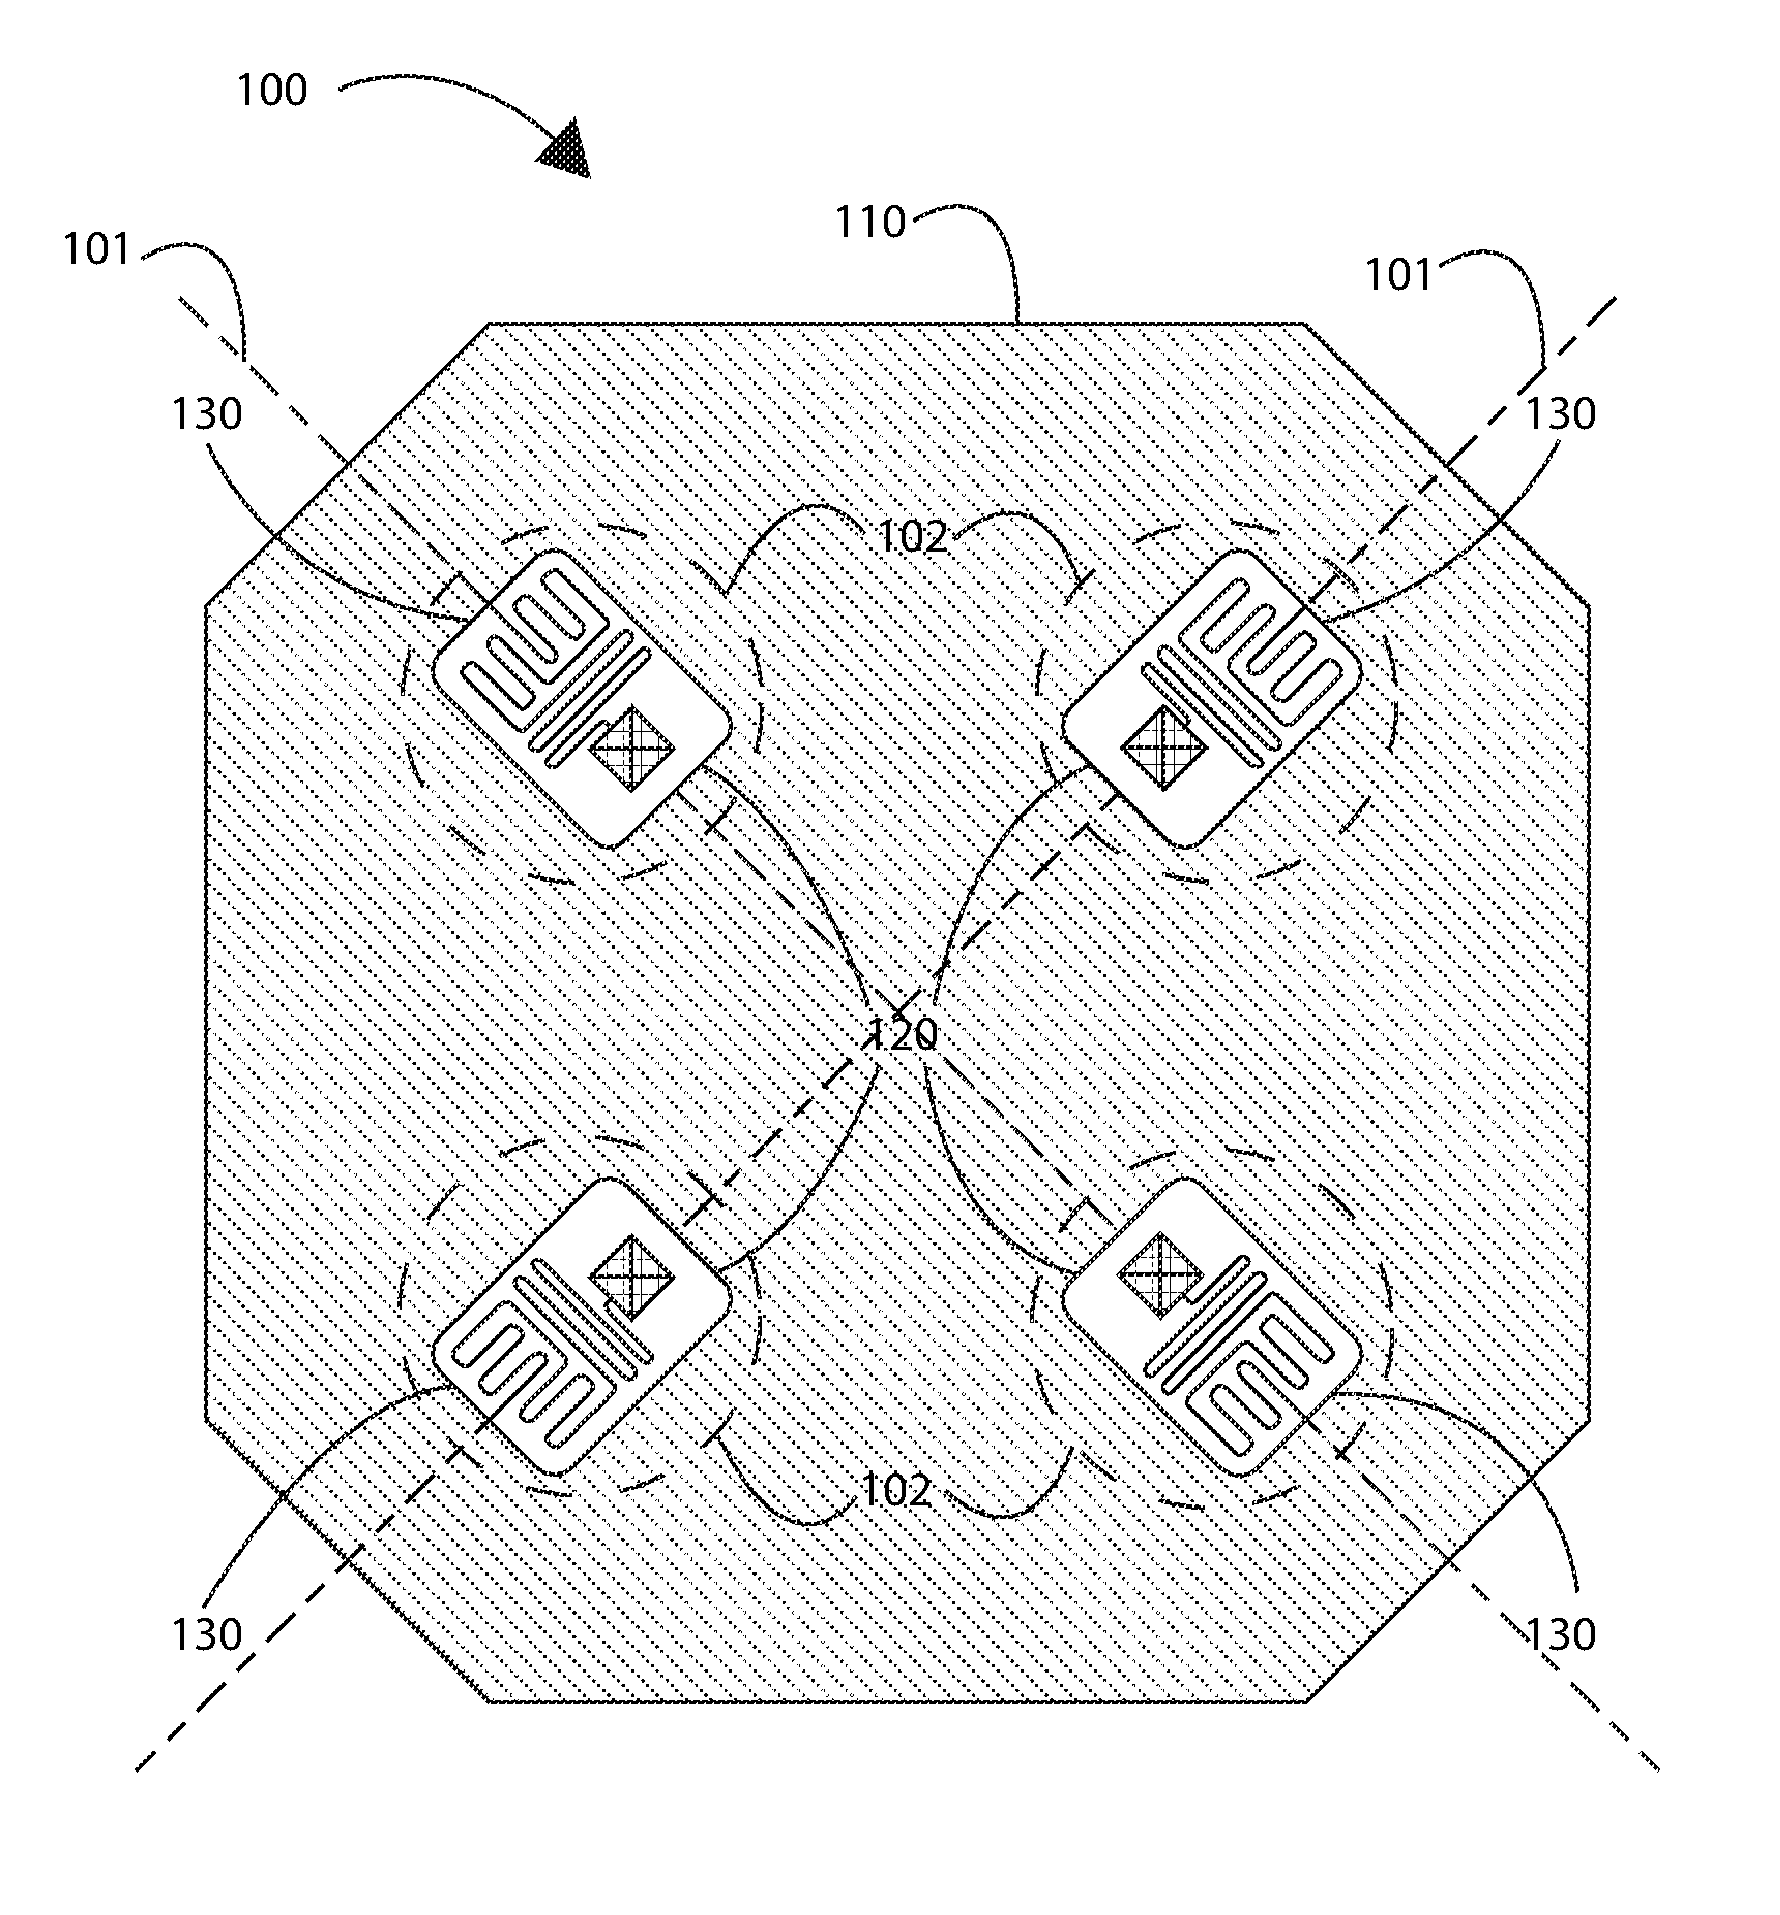 Transducer structure and method for MEMS devices